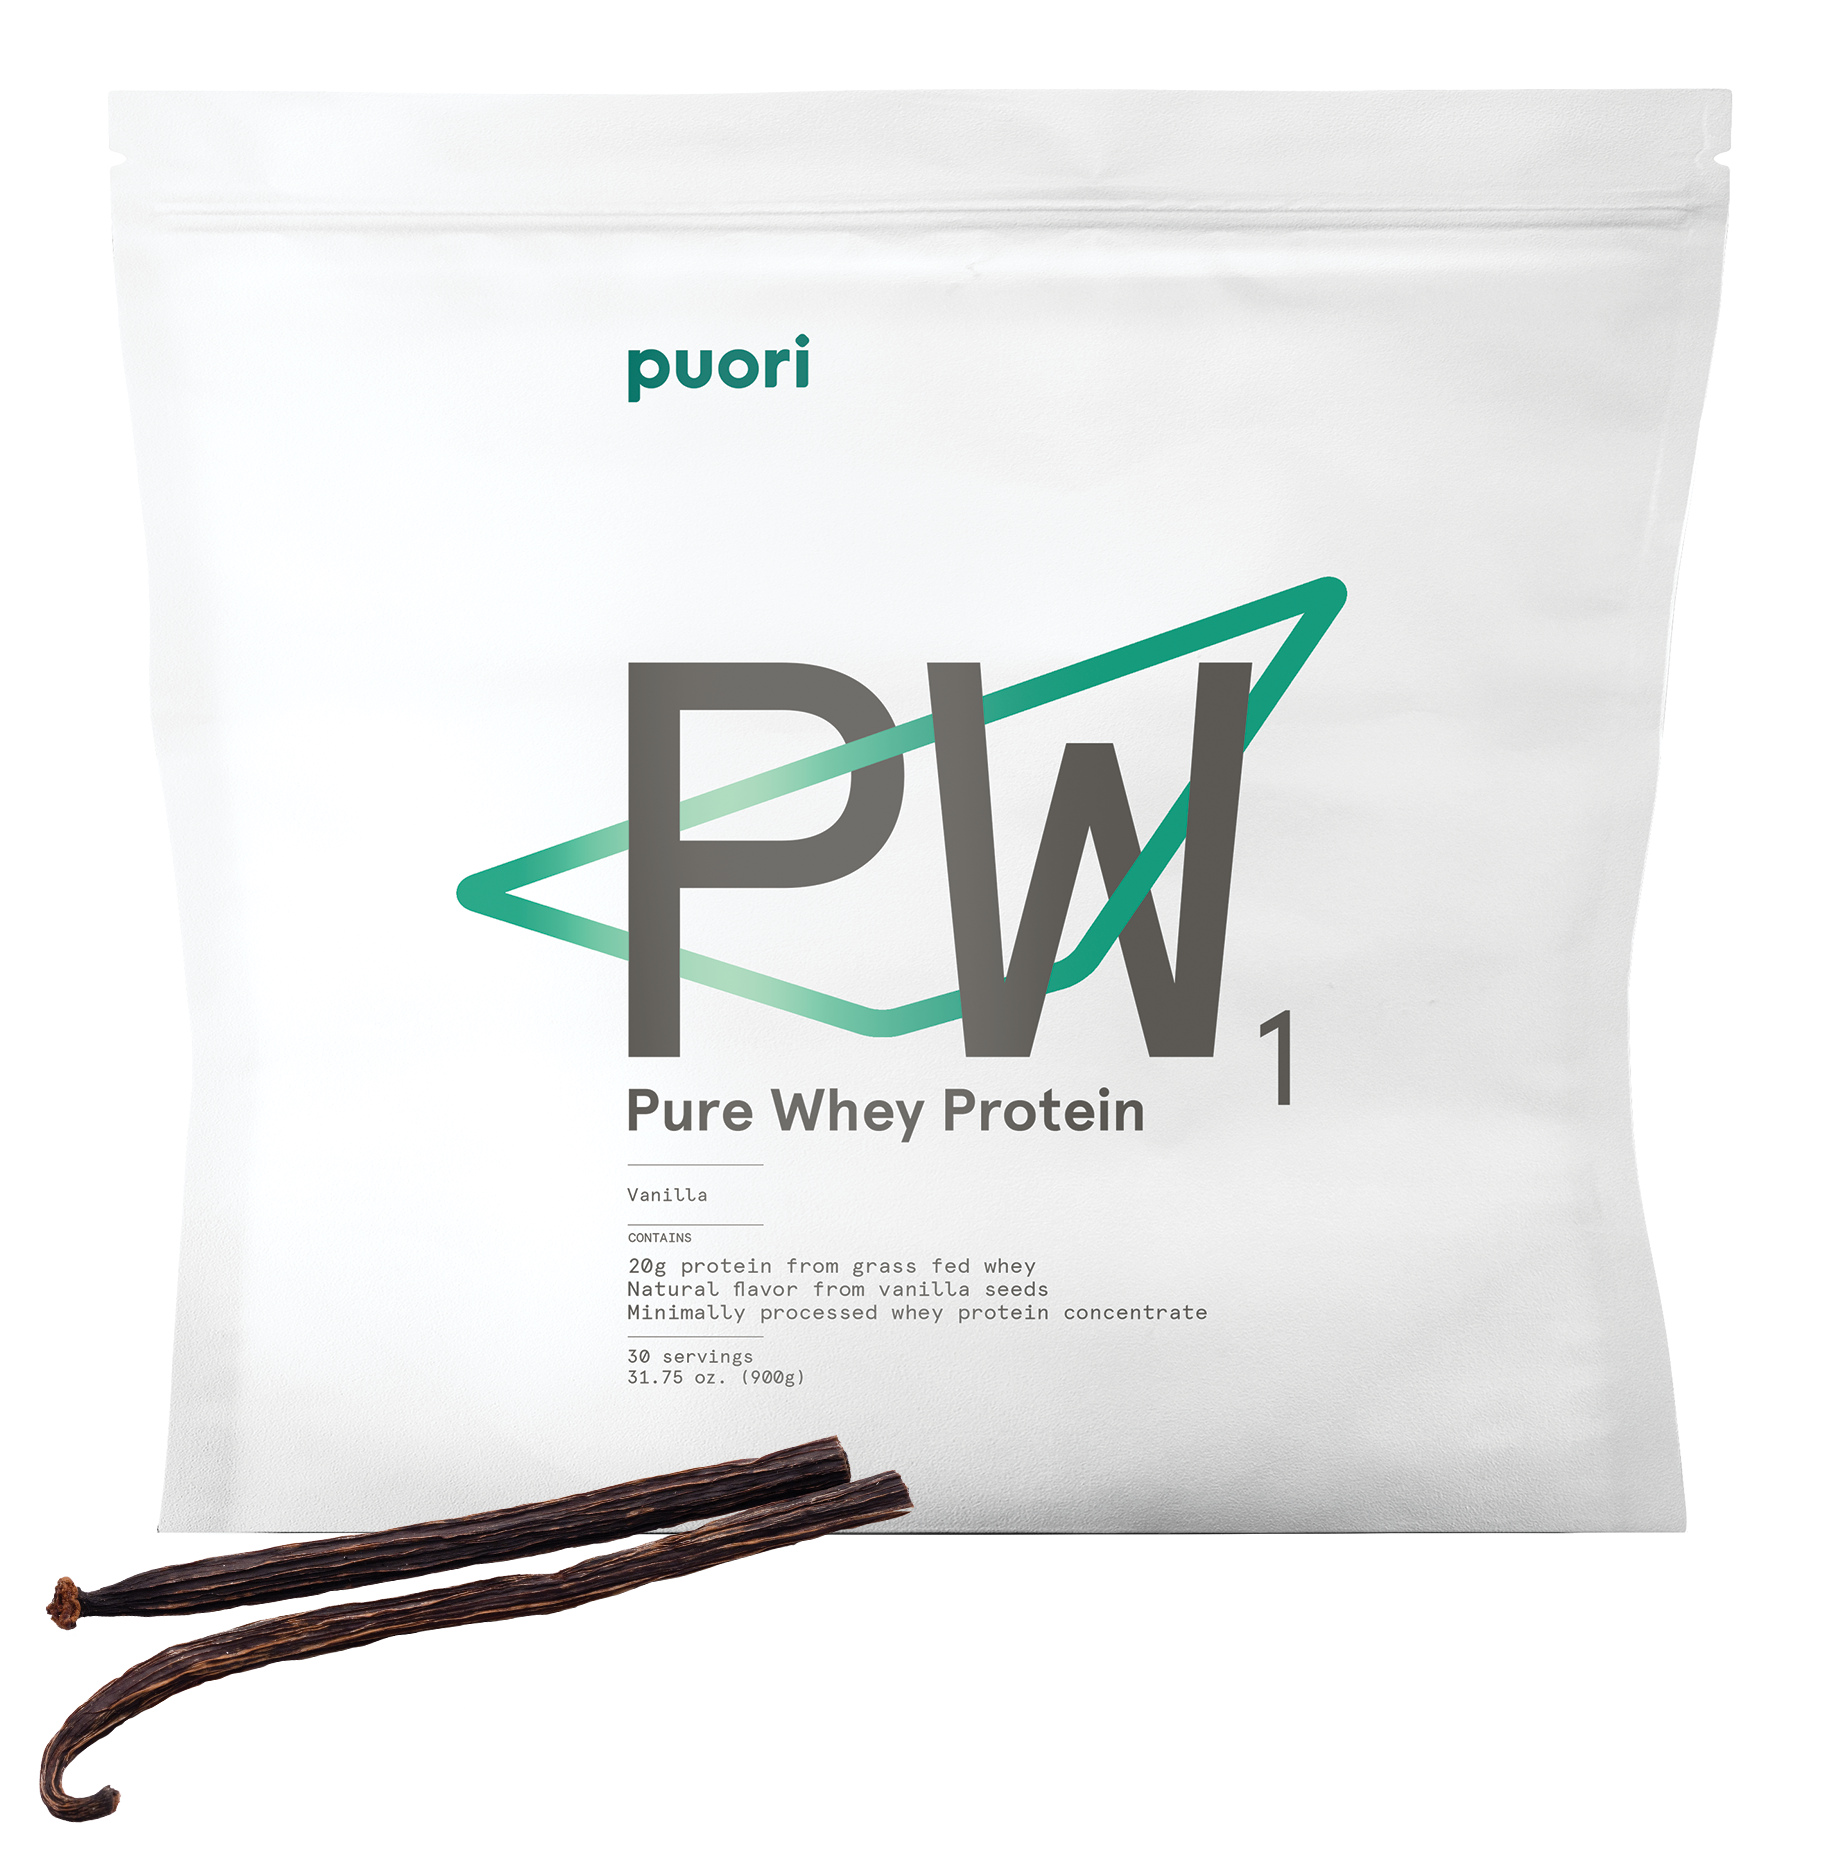 PW1 Vanilla Grass-Fed Whey Protein powder supplement ranked #1 in the U.S. for quality and purity out of 134 best-selling protein powder supplements tested.